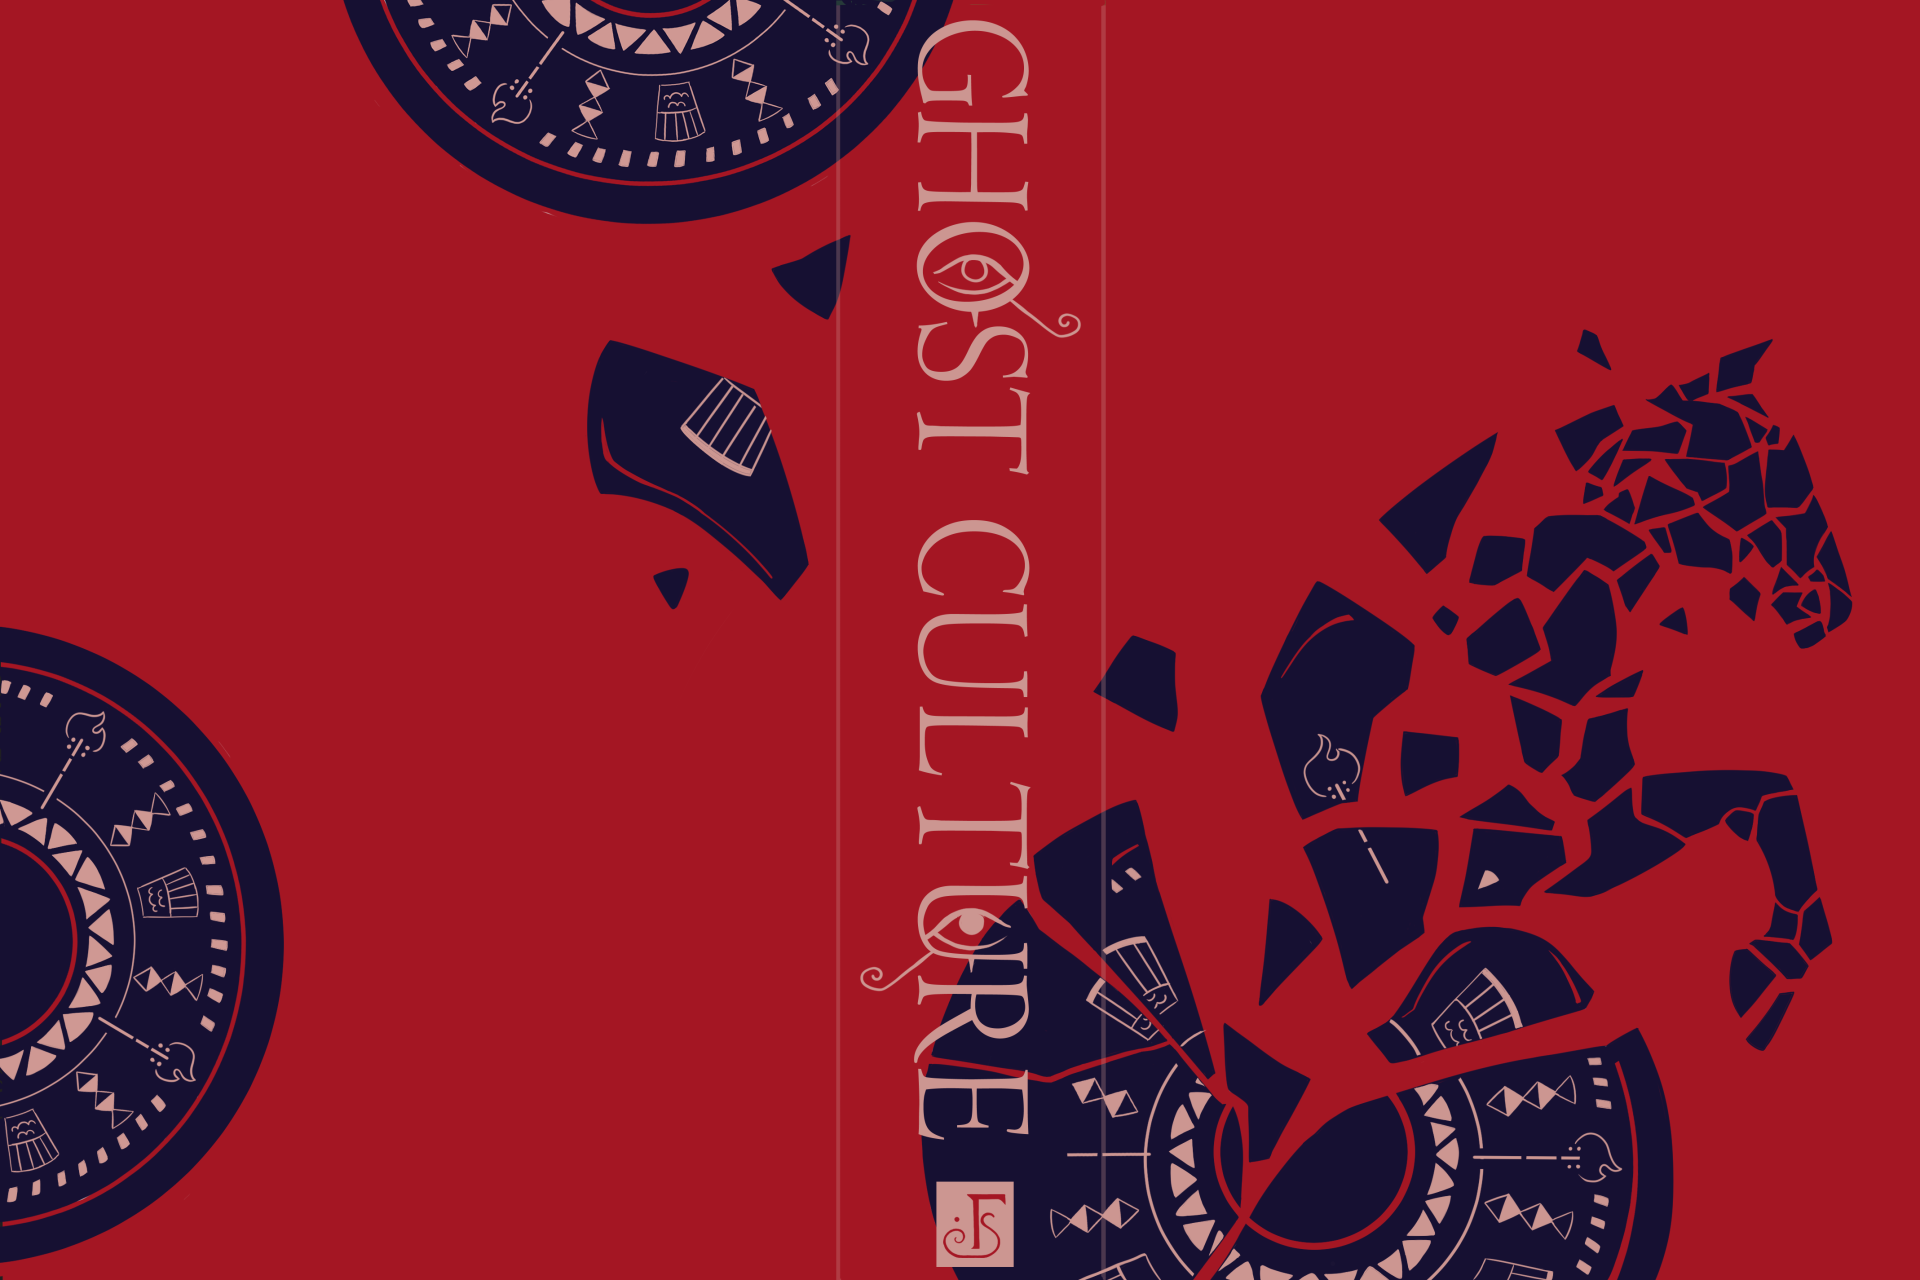 Image of a red book cover with the title 'GHOST CULTURE' written on the spine. The cover is decorated with navy blue and pink plates - one of them shattering to form the shape of a horse.